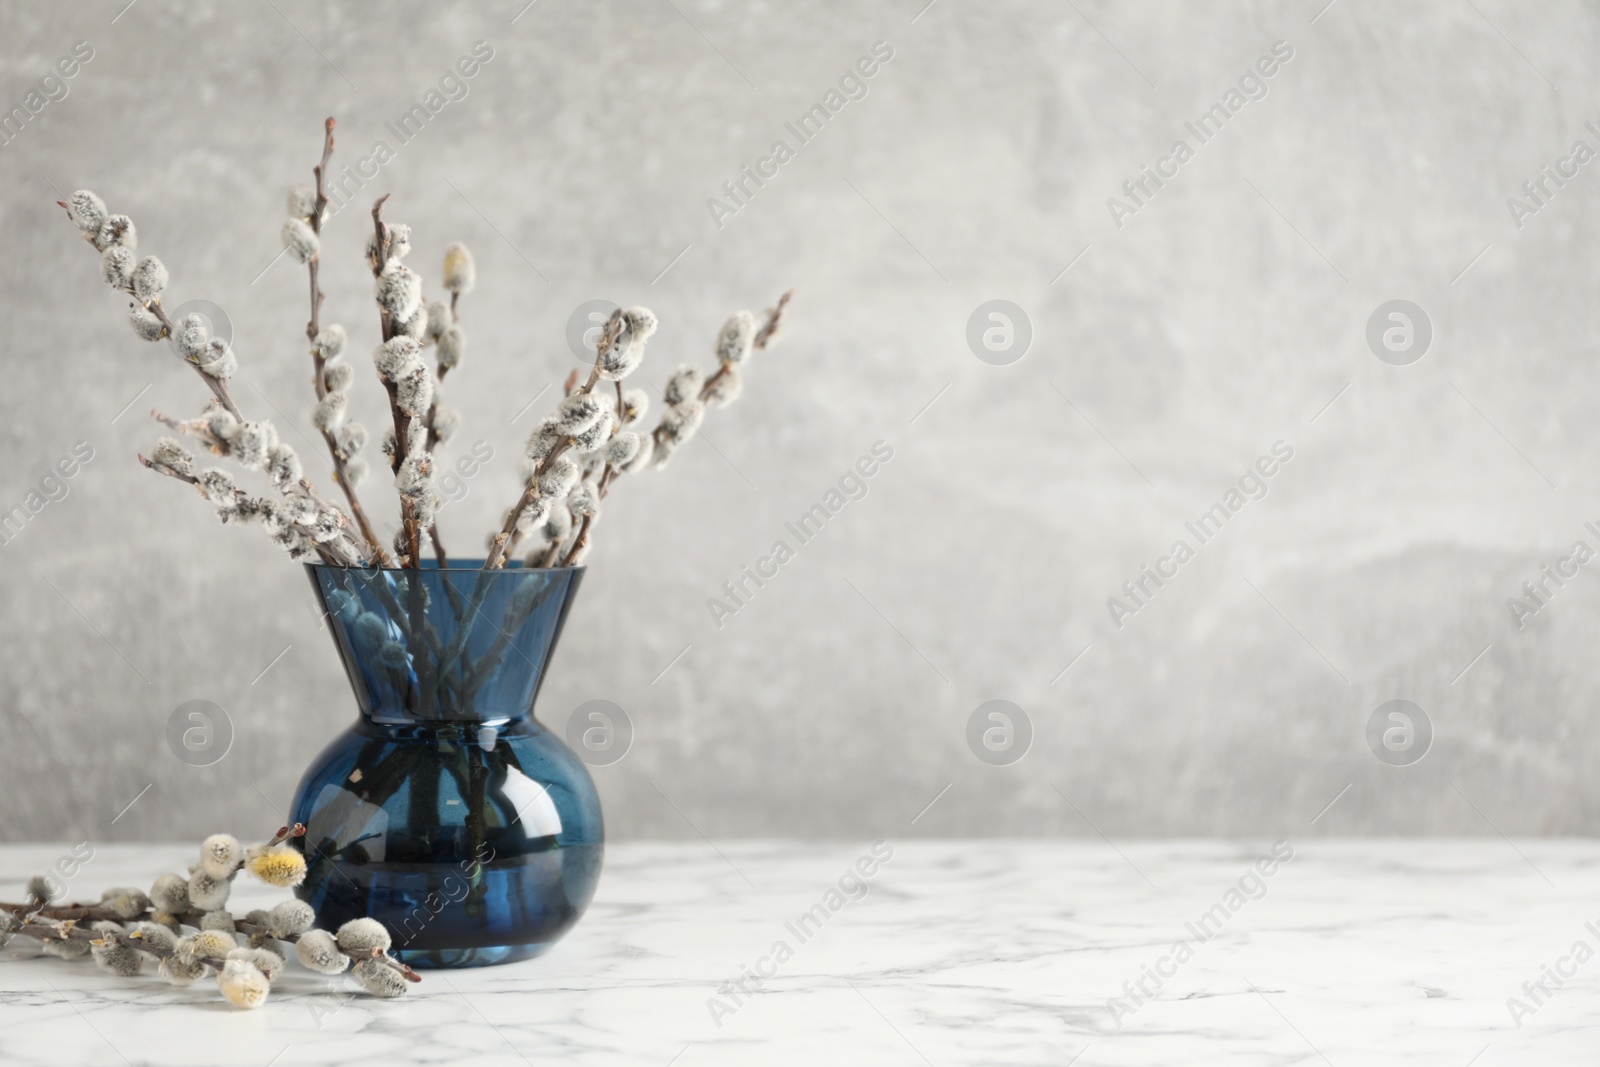 Photo of Beautiful pussy willow branches on white marble table, space for text